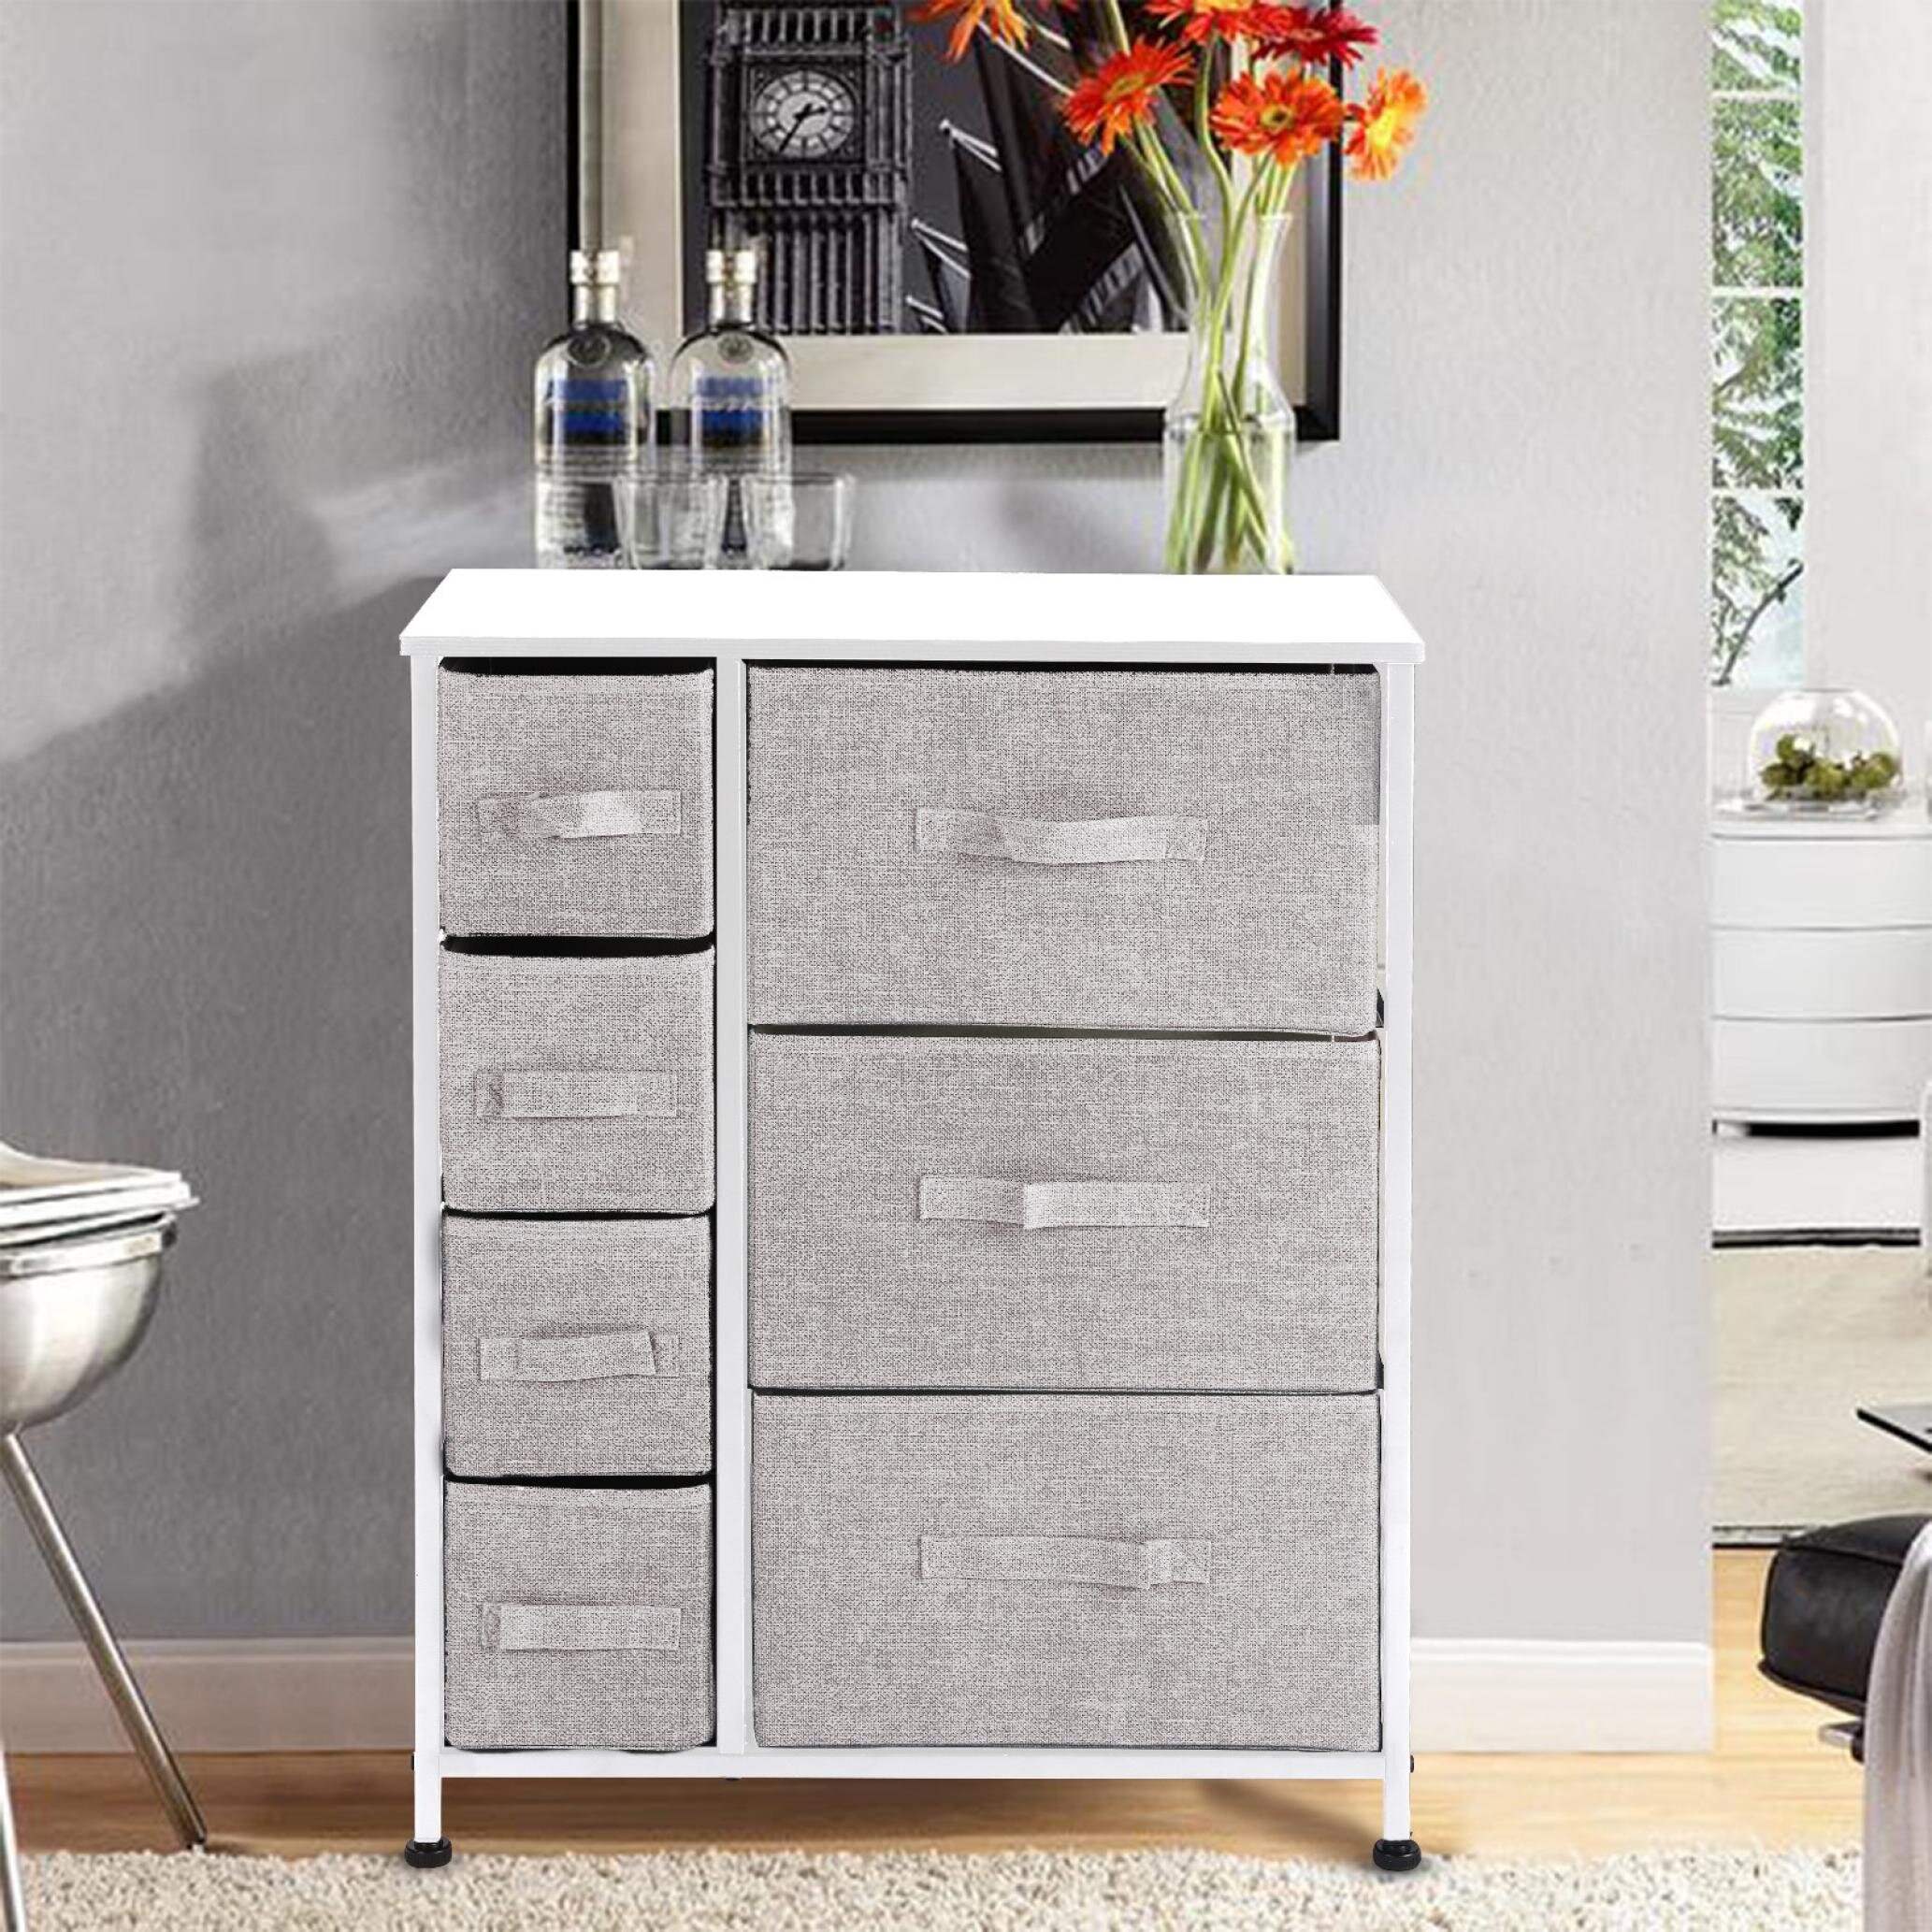 Details about   Chest of Drawers Dresser 4 Drawer Discount Furniture Cabinet Bedroom Storage 